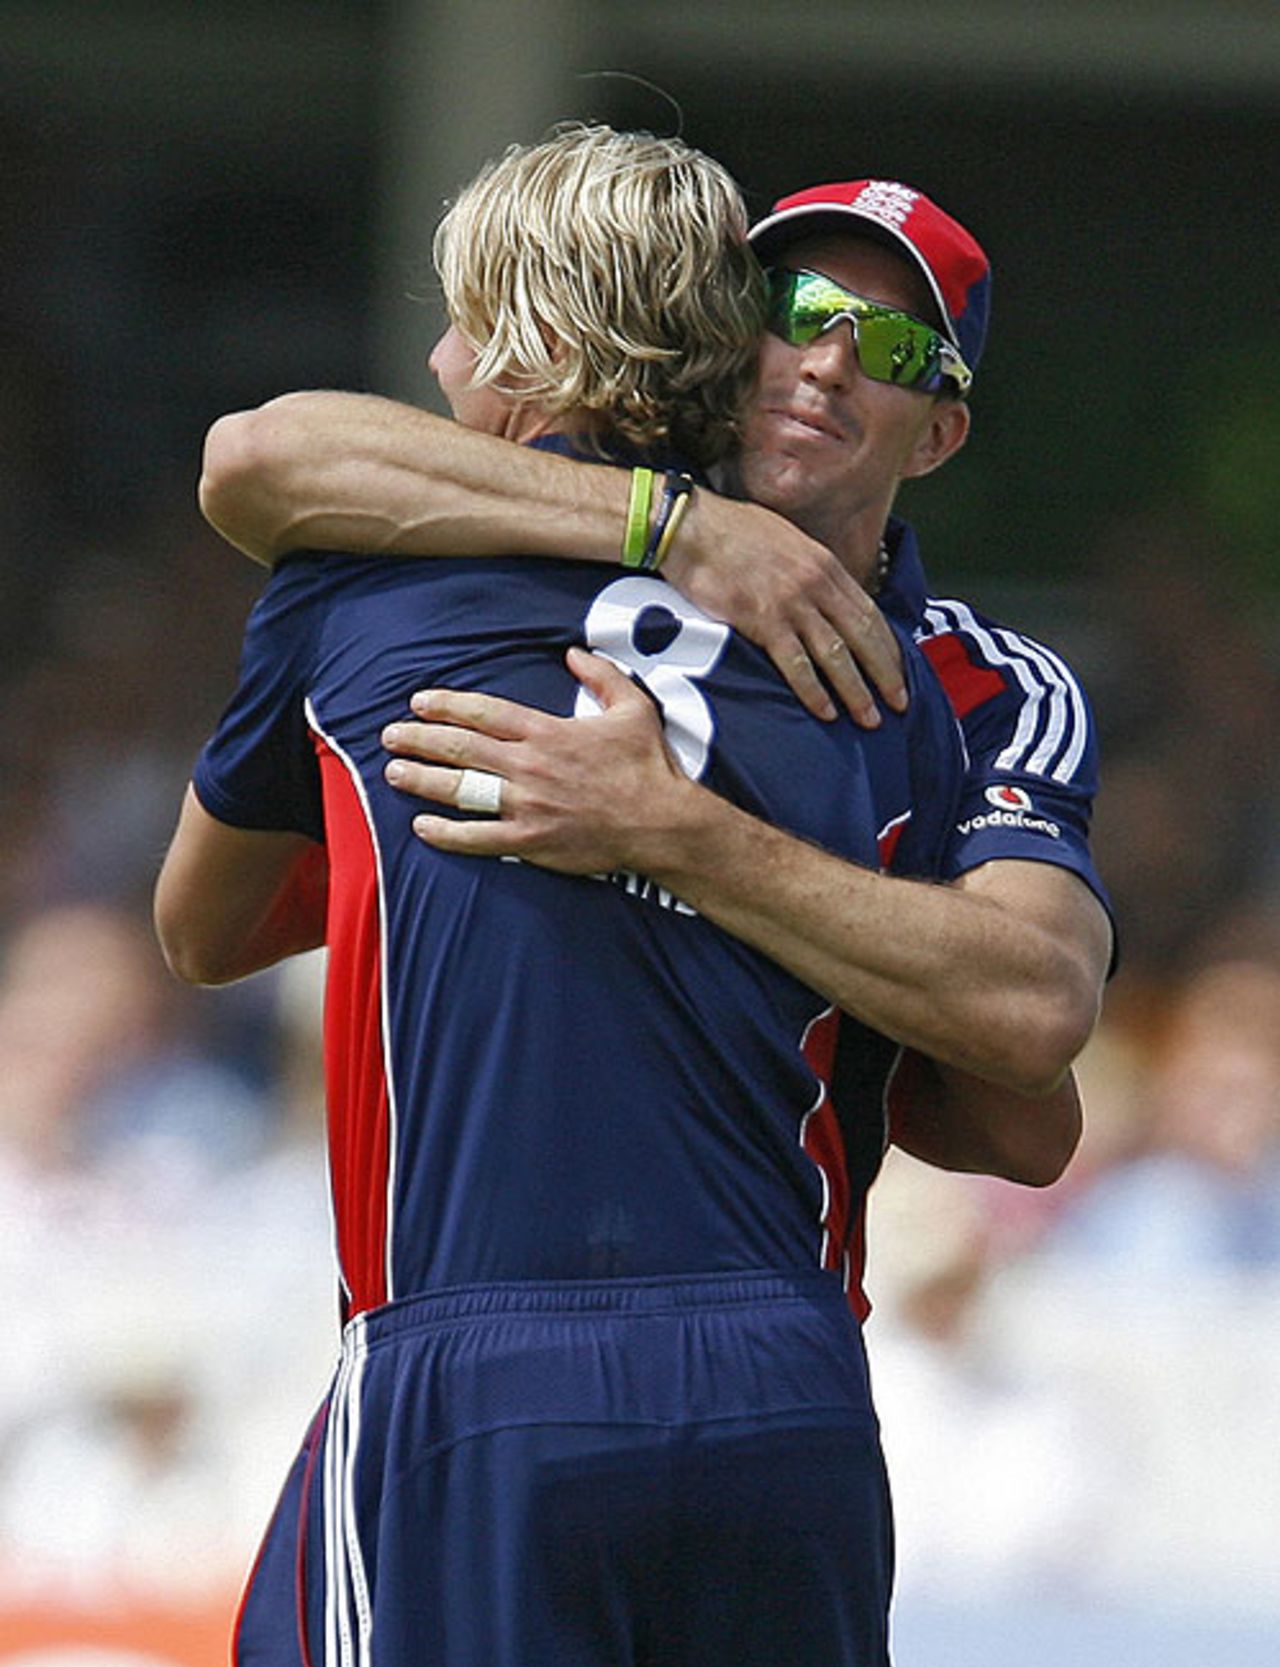 Kevin Pietersen shows his appreciation for Stuart Broad's two wickets, England v New Zealand, 5th ODI, Lord's, June 28, 2008